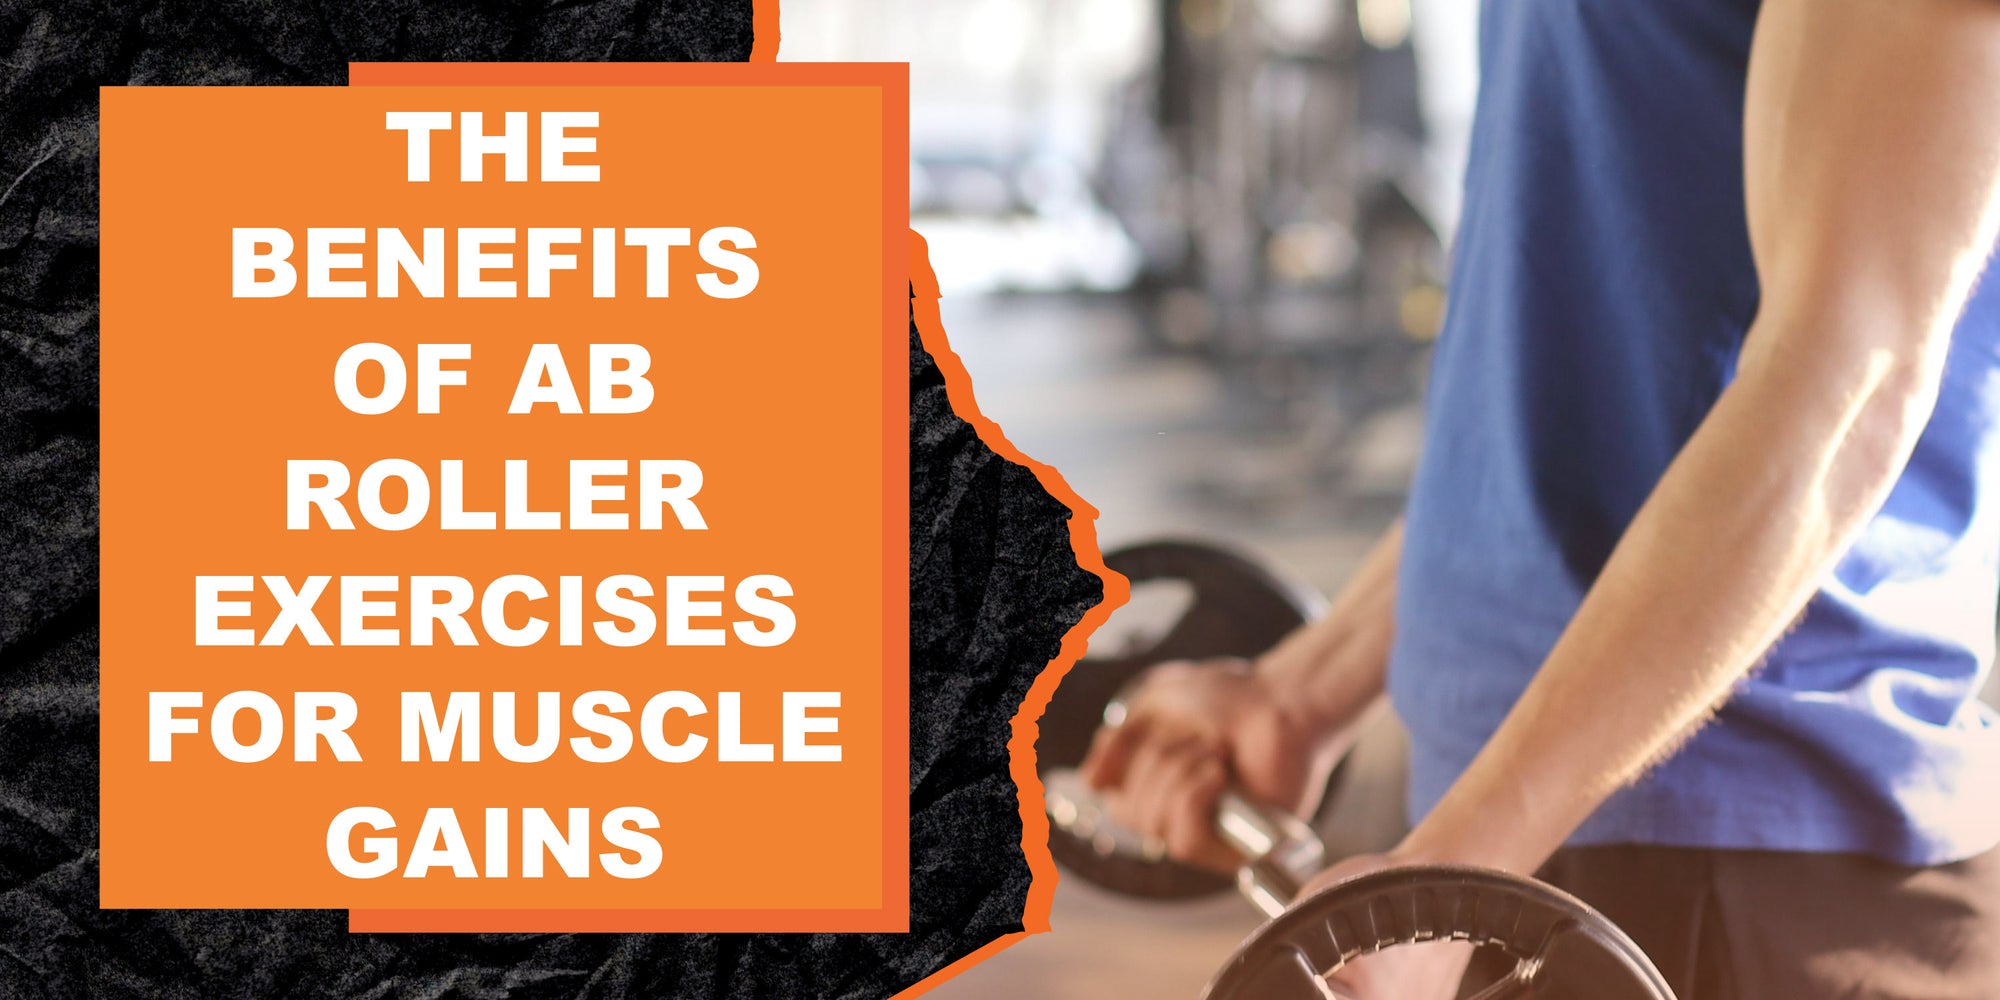 The Benefits of Ab Roller Exercises for Muscle Gains